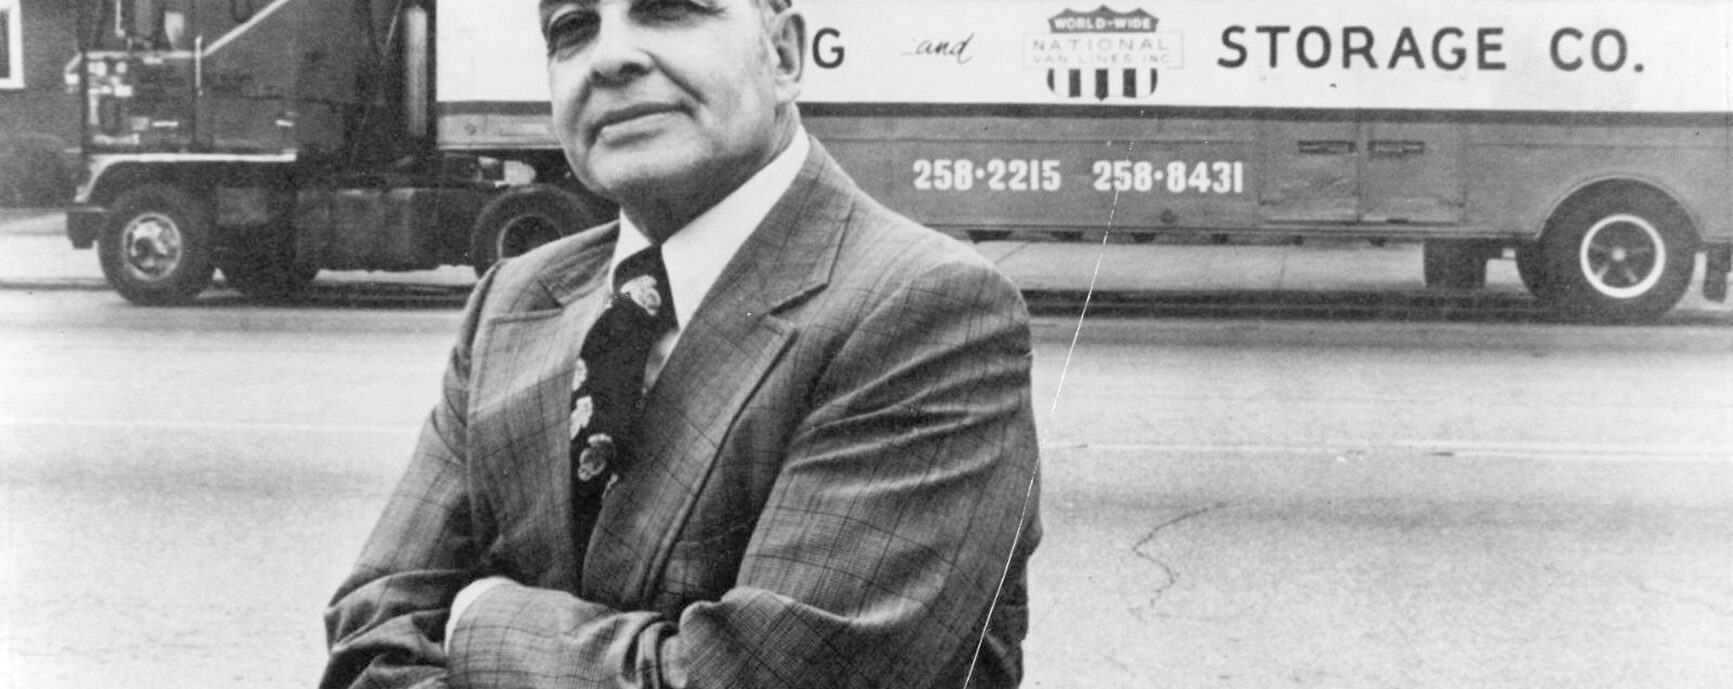 Ward with arms crossed in a suit and tie in front of a truck that reads "E.E. Ward Storage Co."